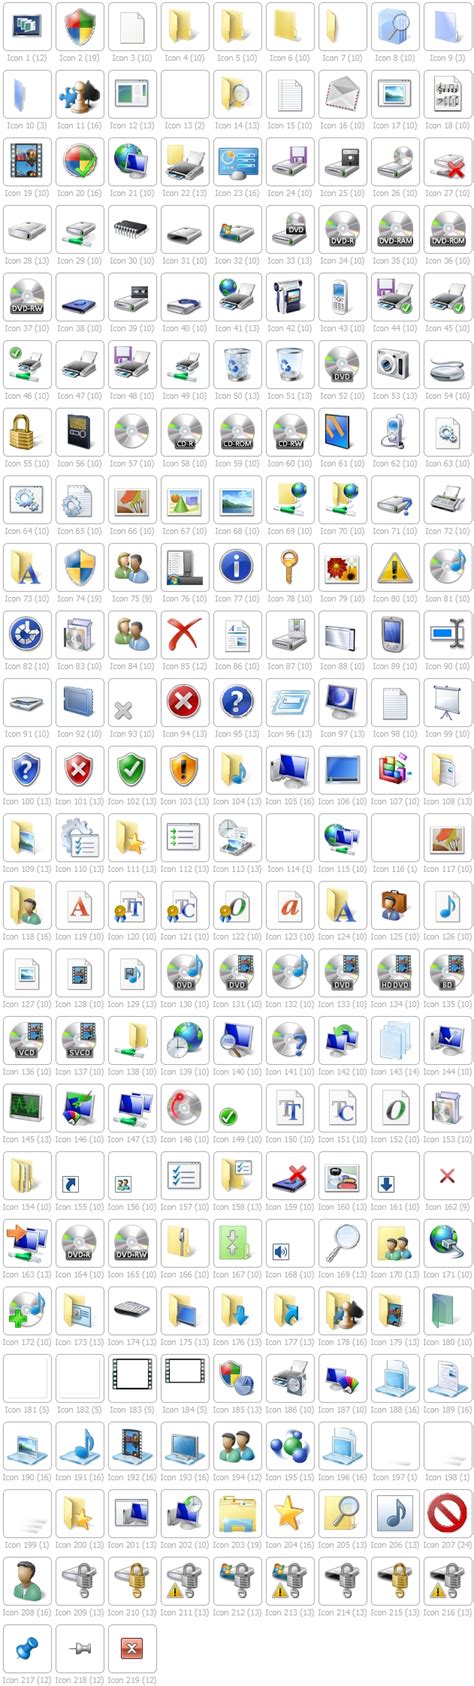 Windows Icons Reference List With Details Locations And Images